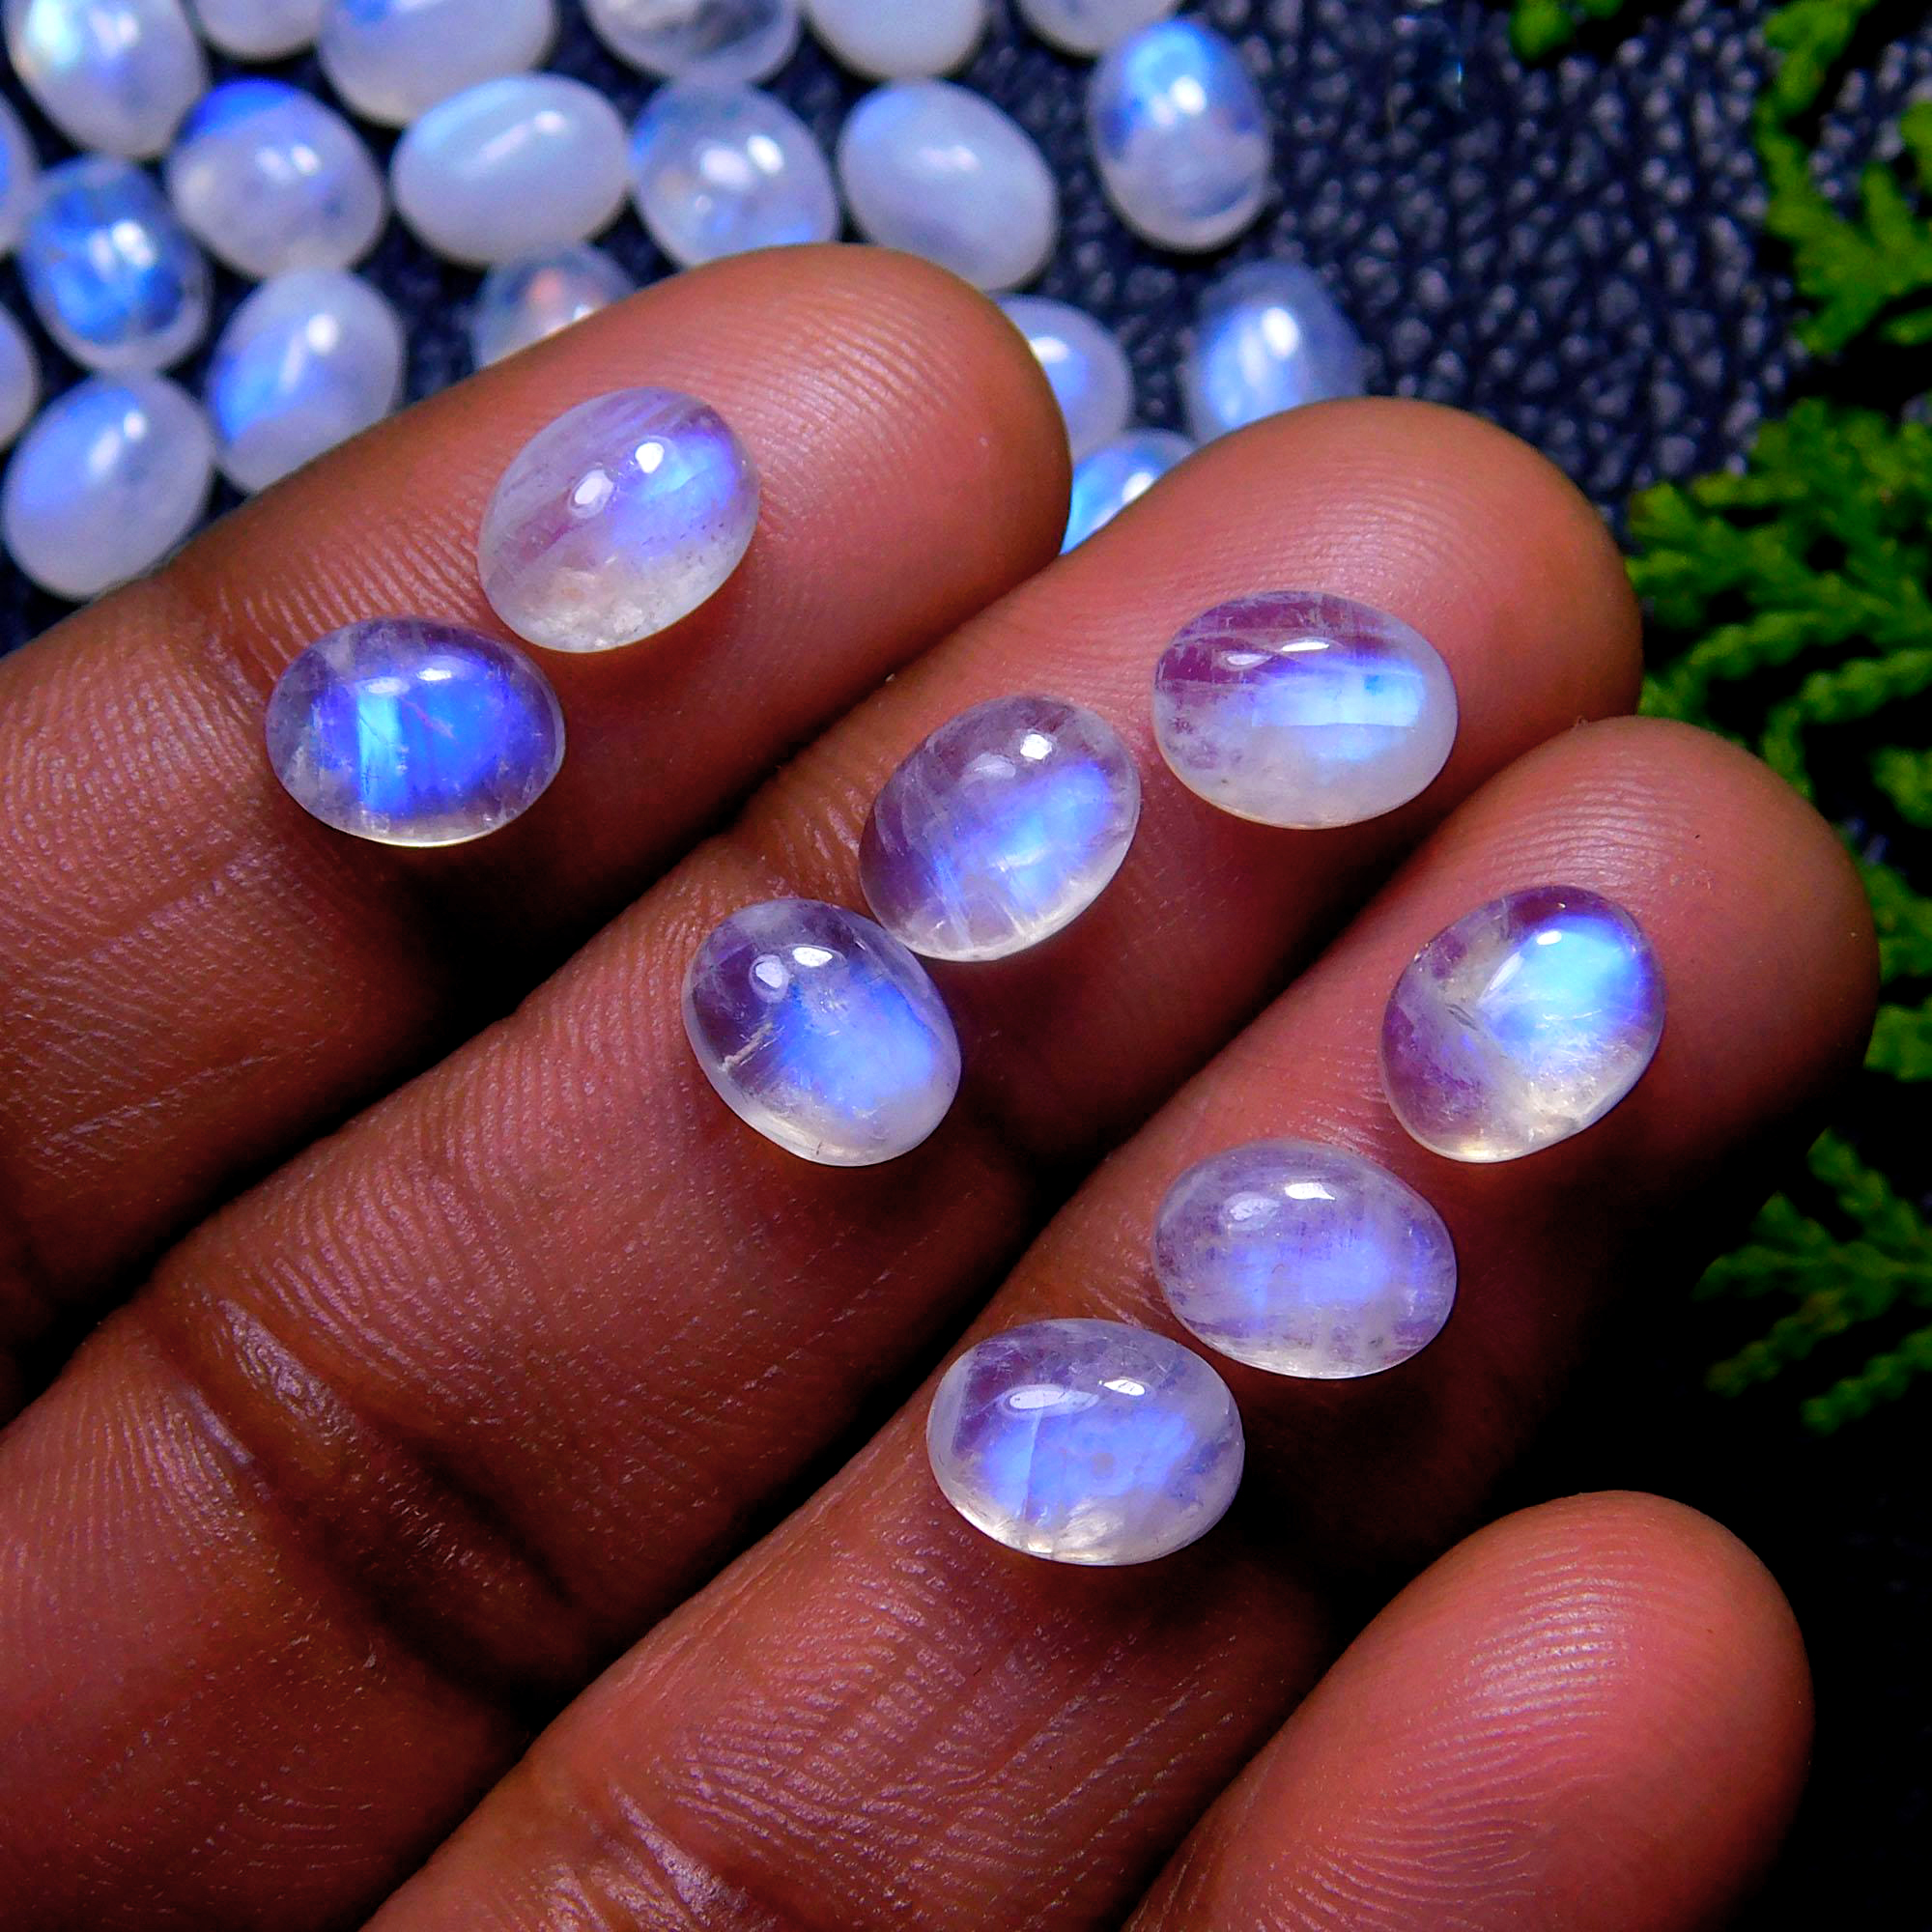 150Pcs 244Cts Natural Rainbow Moonstone Oval Shape Blue Fire Cabochon Lot Loose Gemstone Jewelry Crystal For Birthday Gift 8X6mm #9856